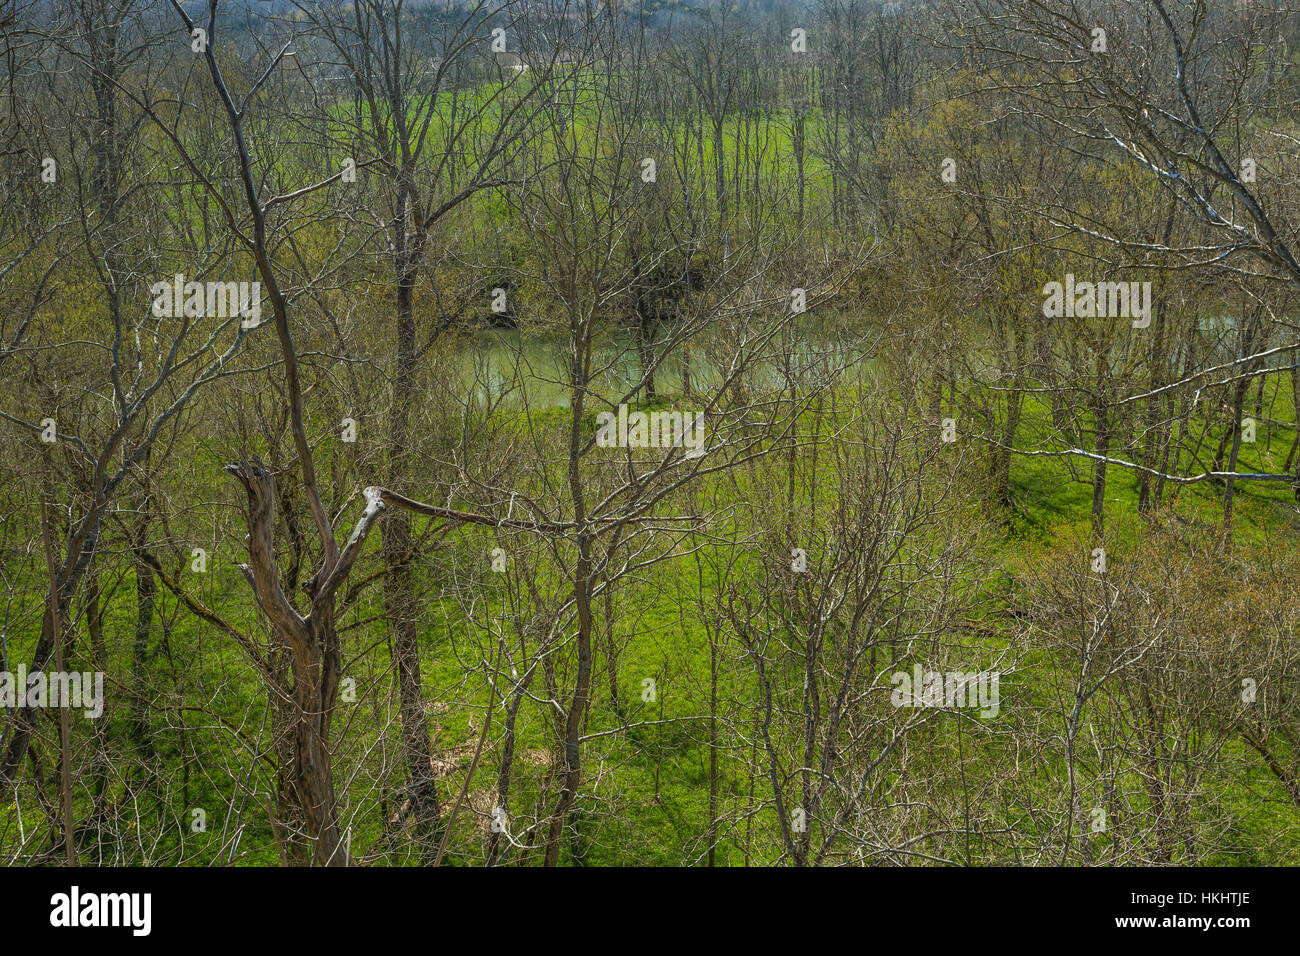 Spring trees along the valley of Ohio Brush Creek, viewed from Great Serpent Mound at Serpent Mound State Memorial in Adams County, Ohio, USA Stock Photo